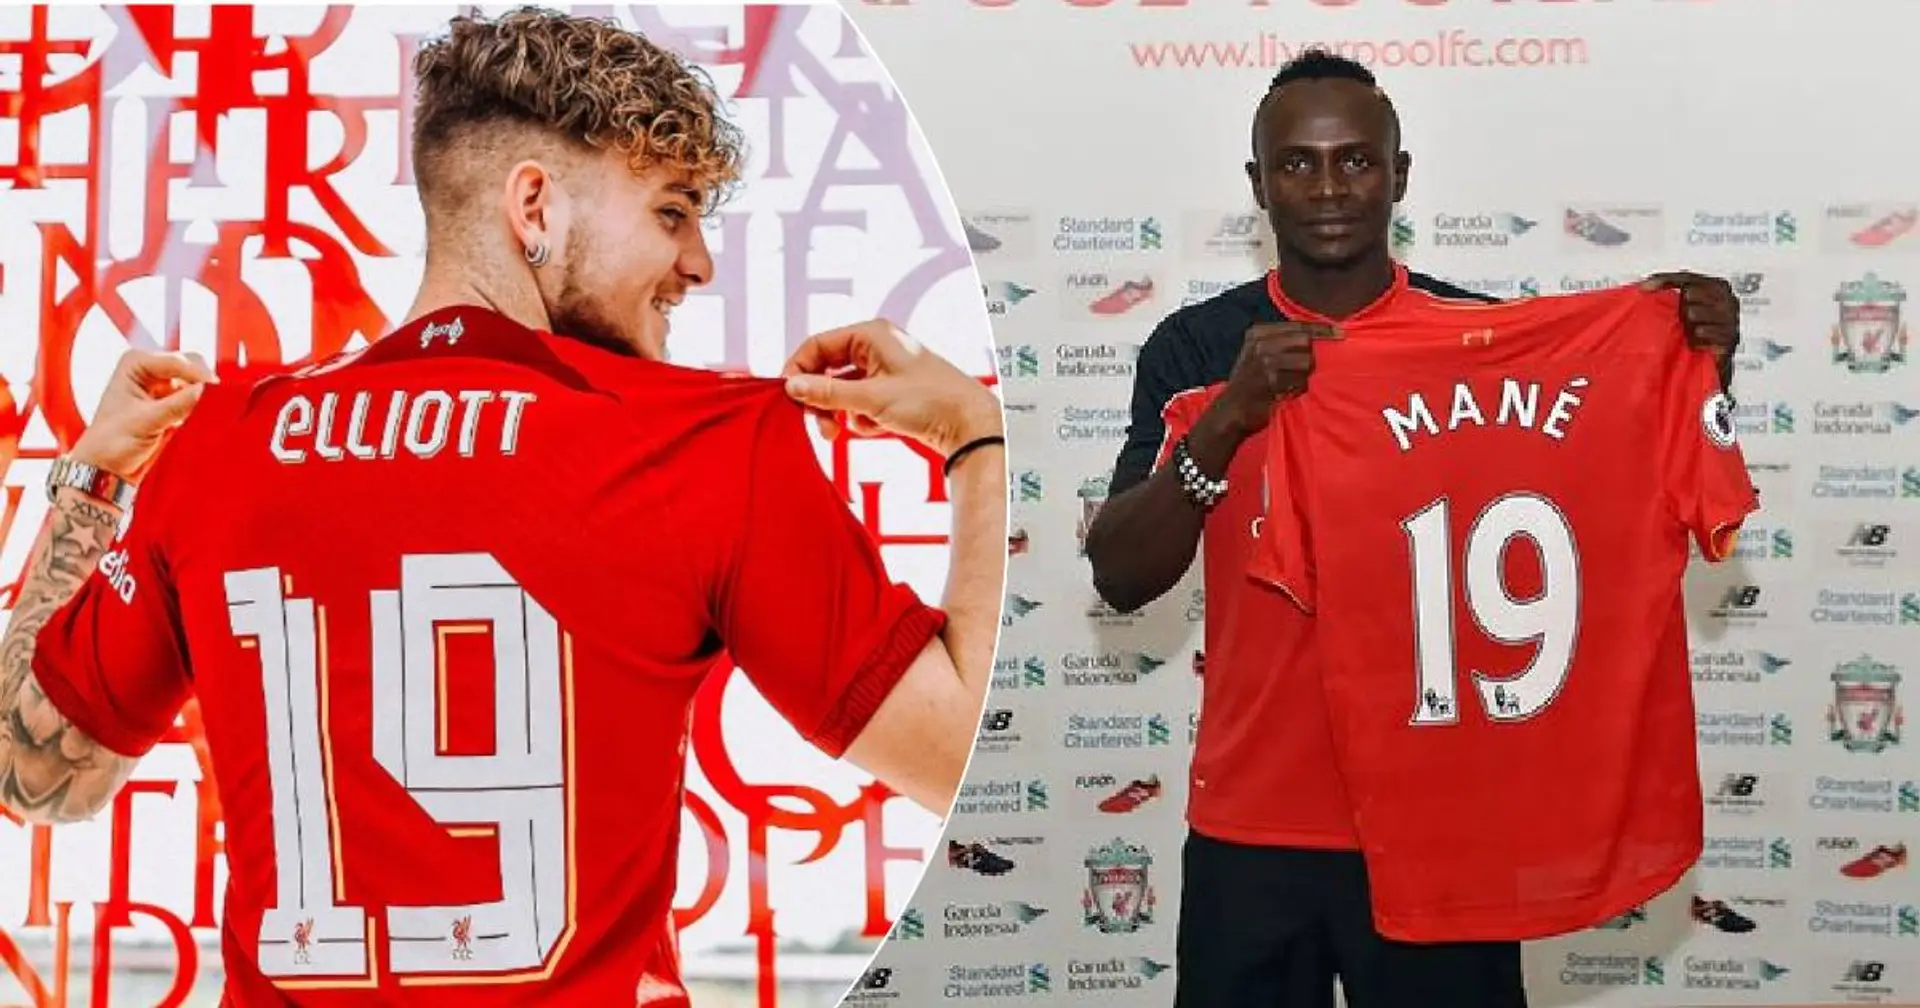 Elliott changes jersey number from 67 to Mane's old No.19: 'I want to prove I'm worthy of it'